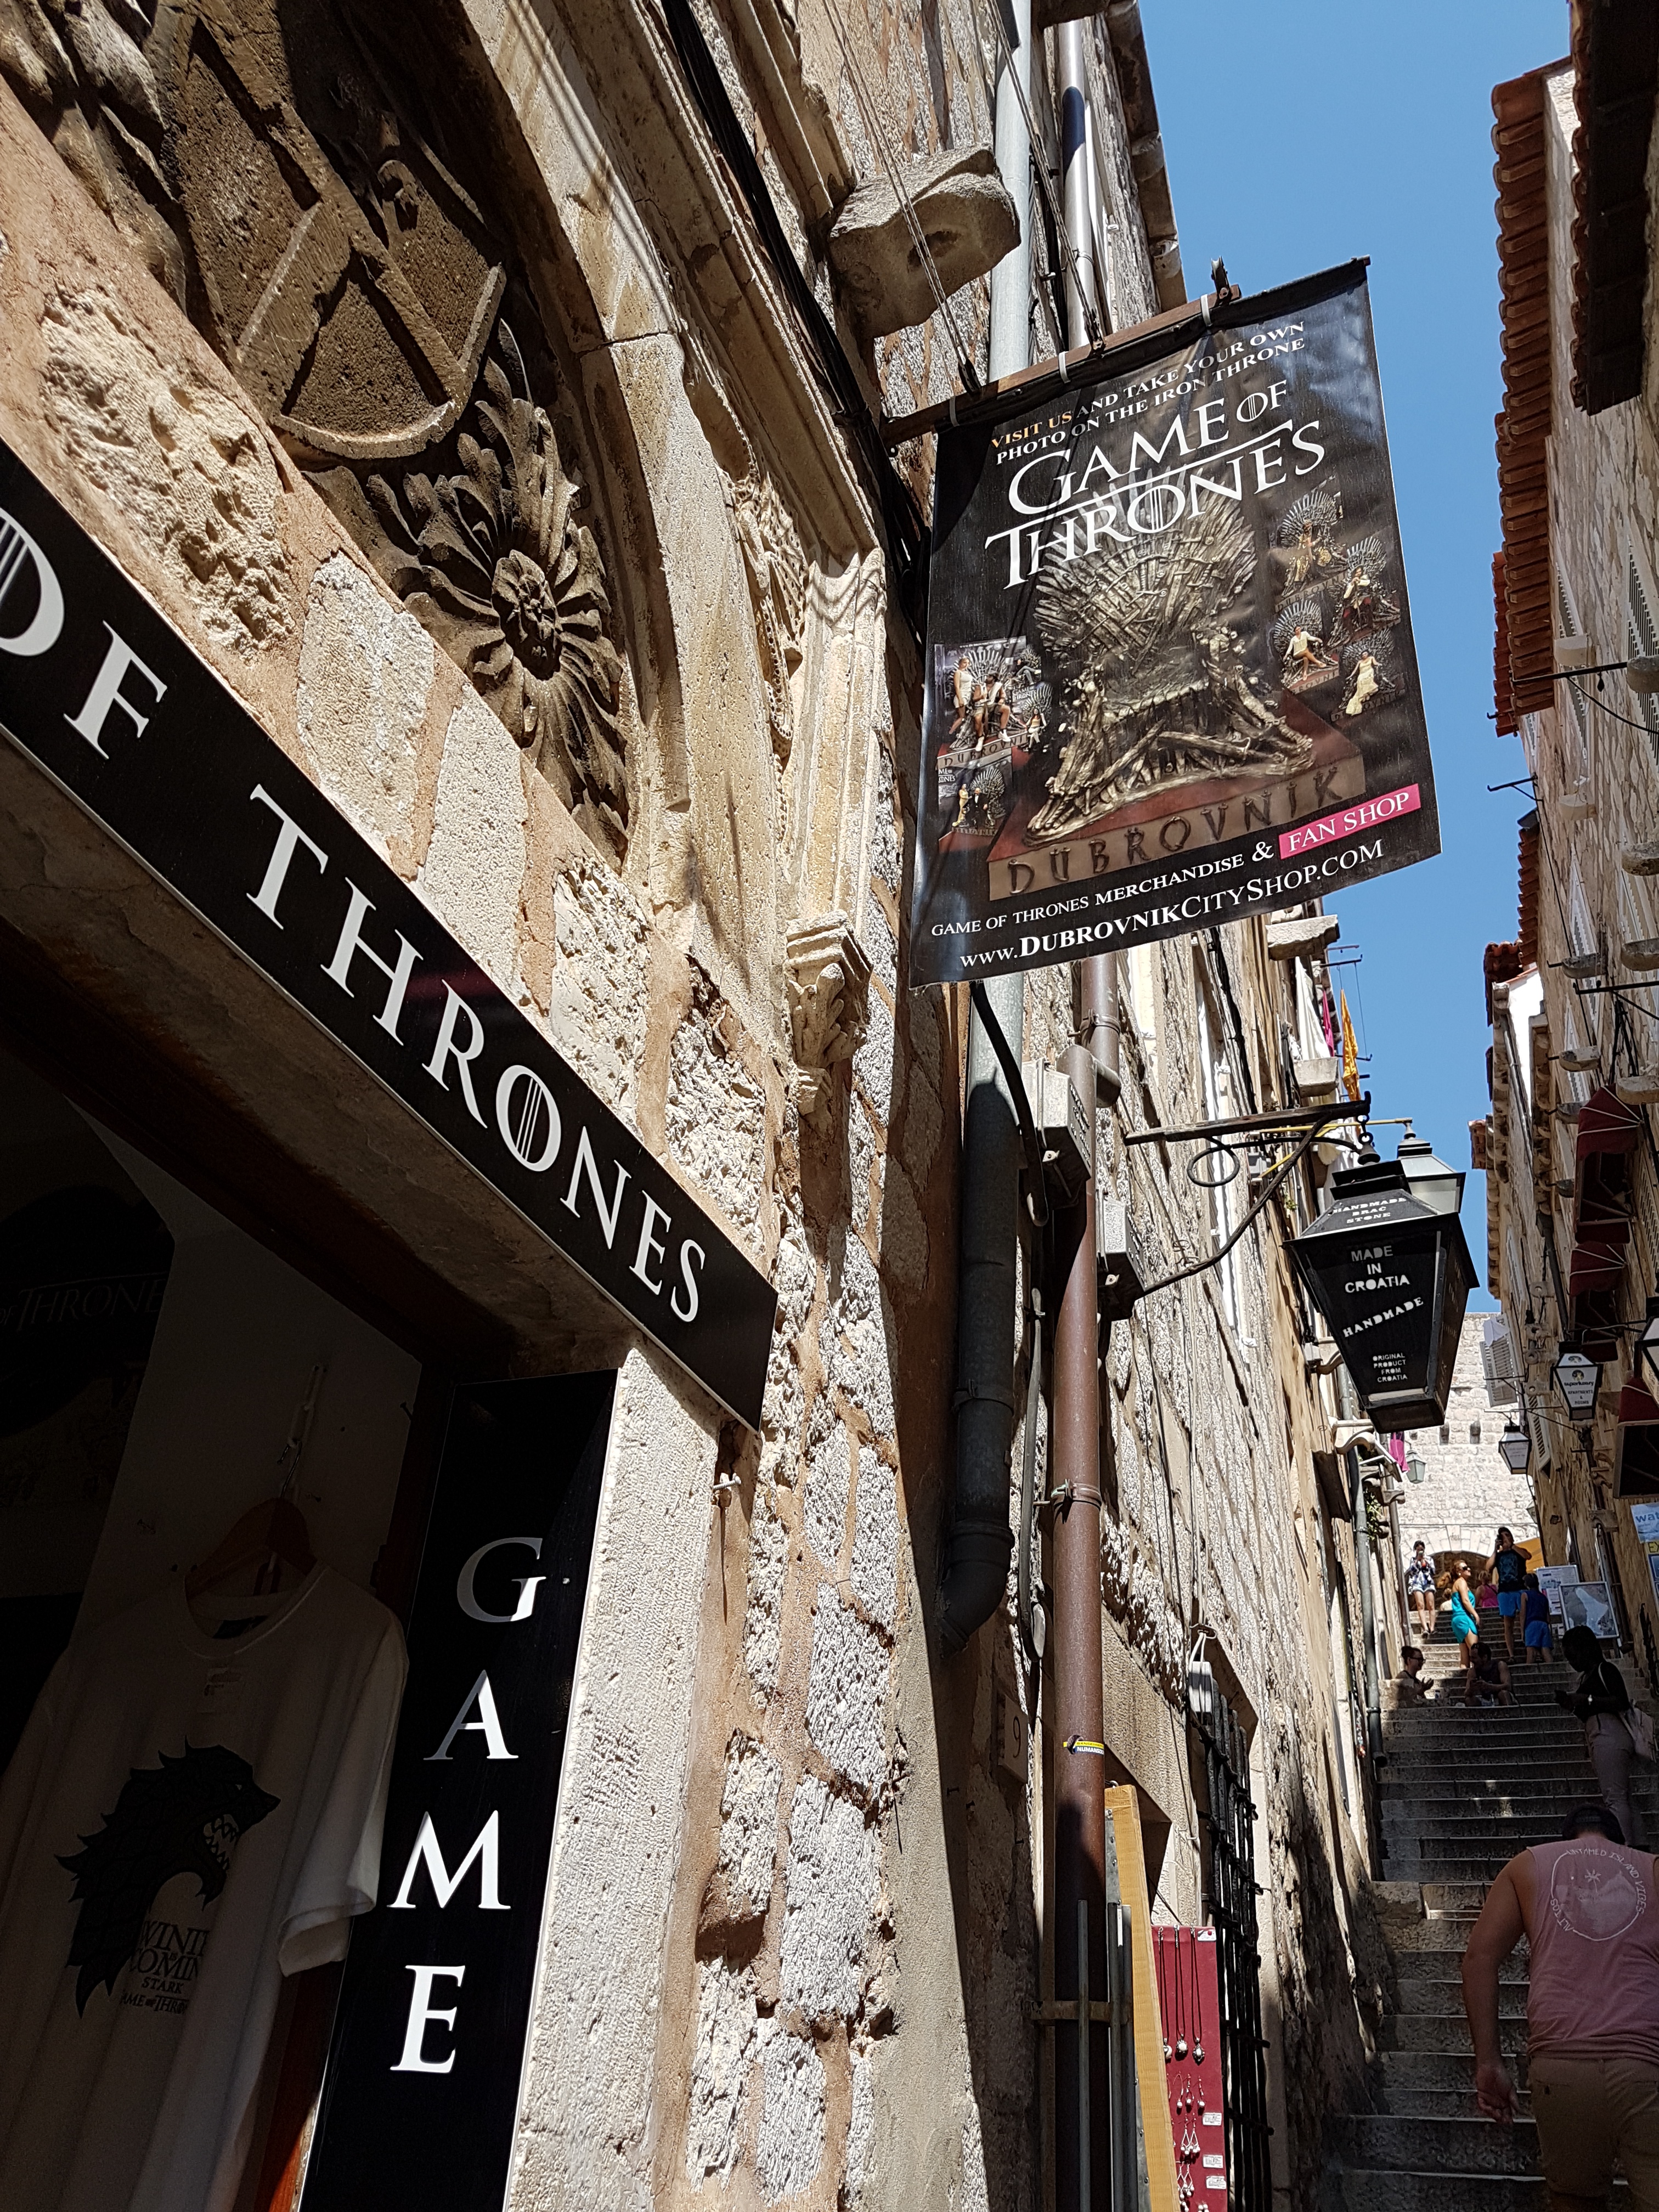 Game of Thrones souvenir shop in Dubrovnik | what to do in Dubrovnik